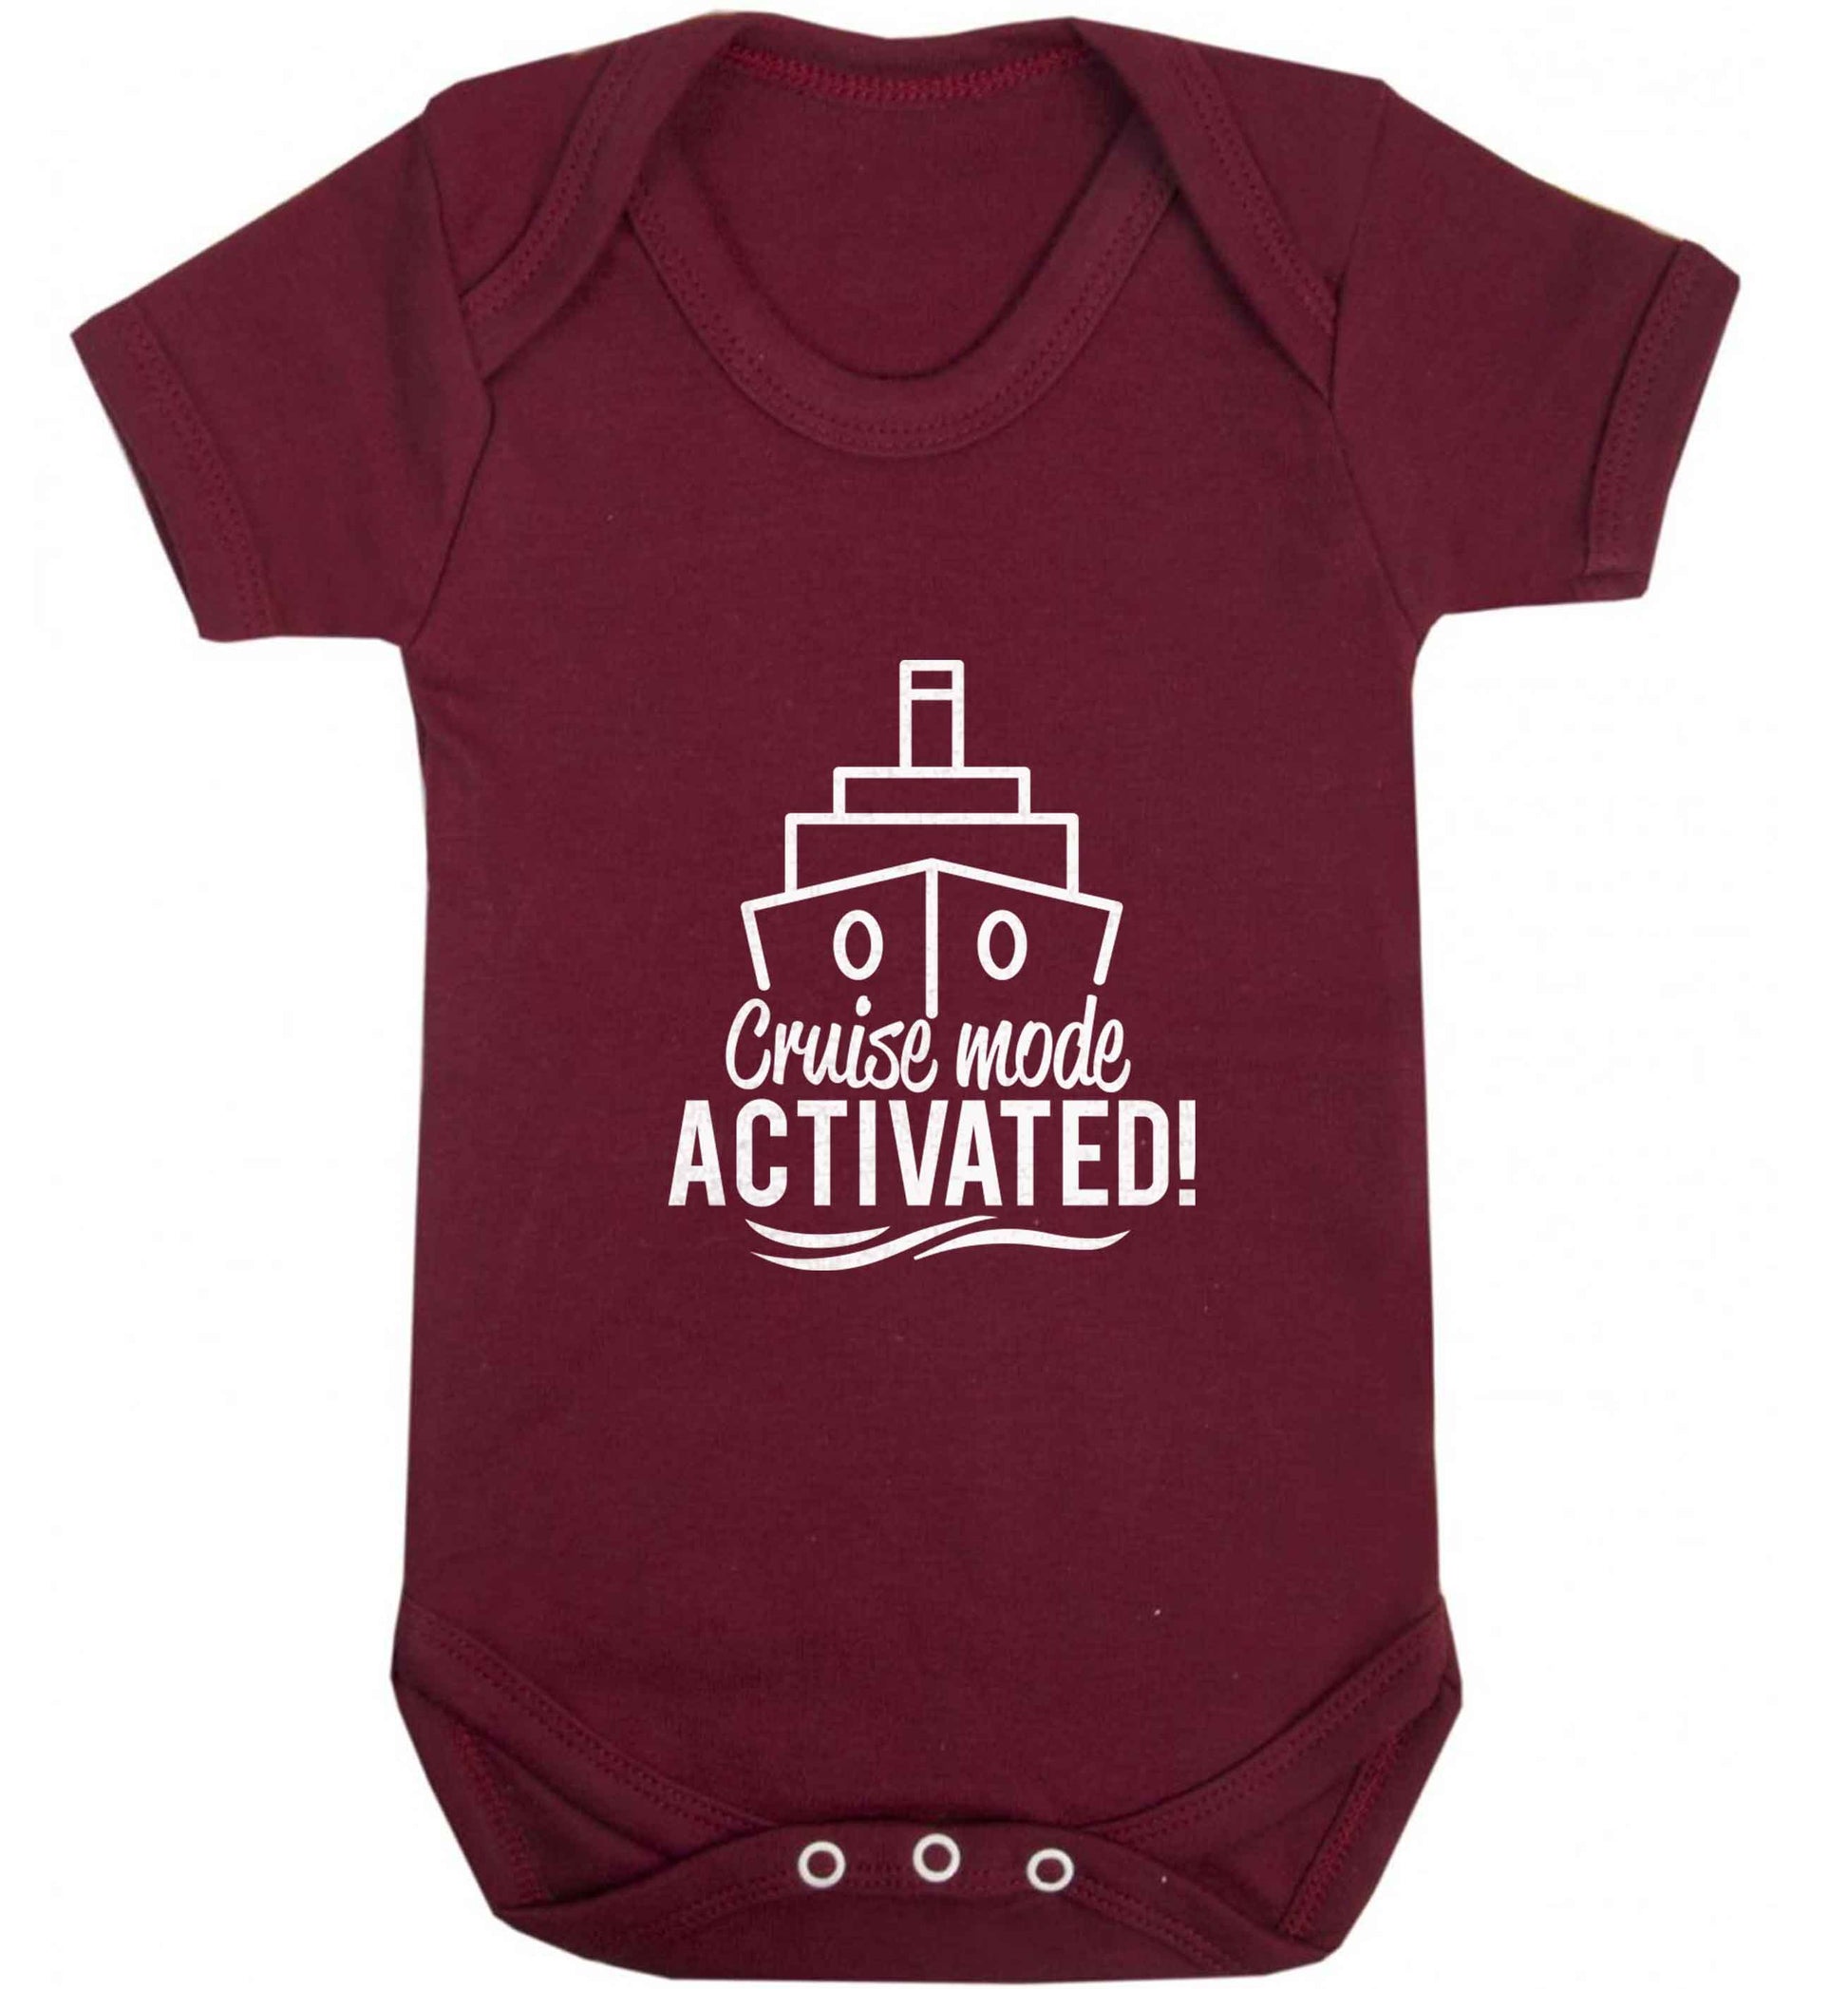 Cruise mode activated baby vest maroon 18-24 months